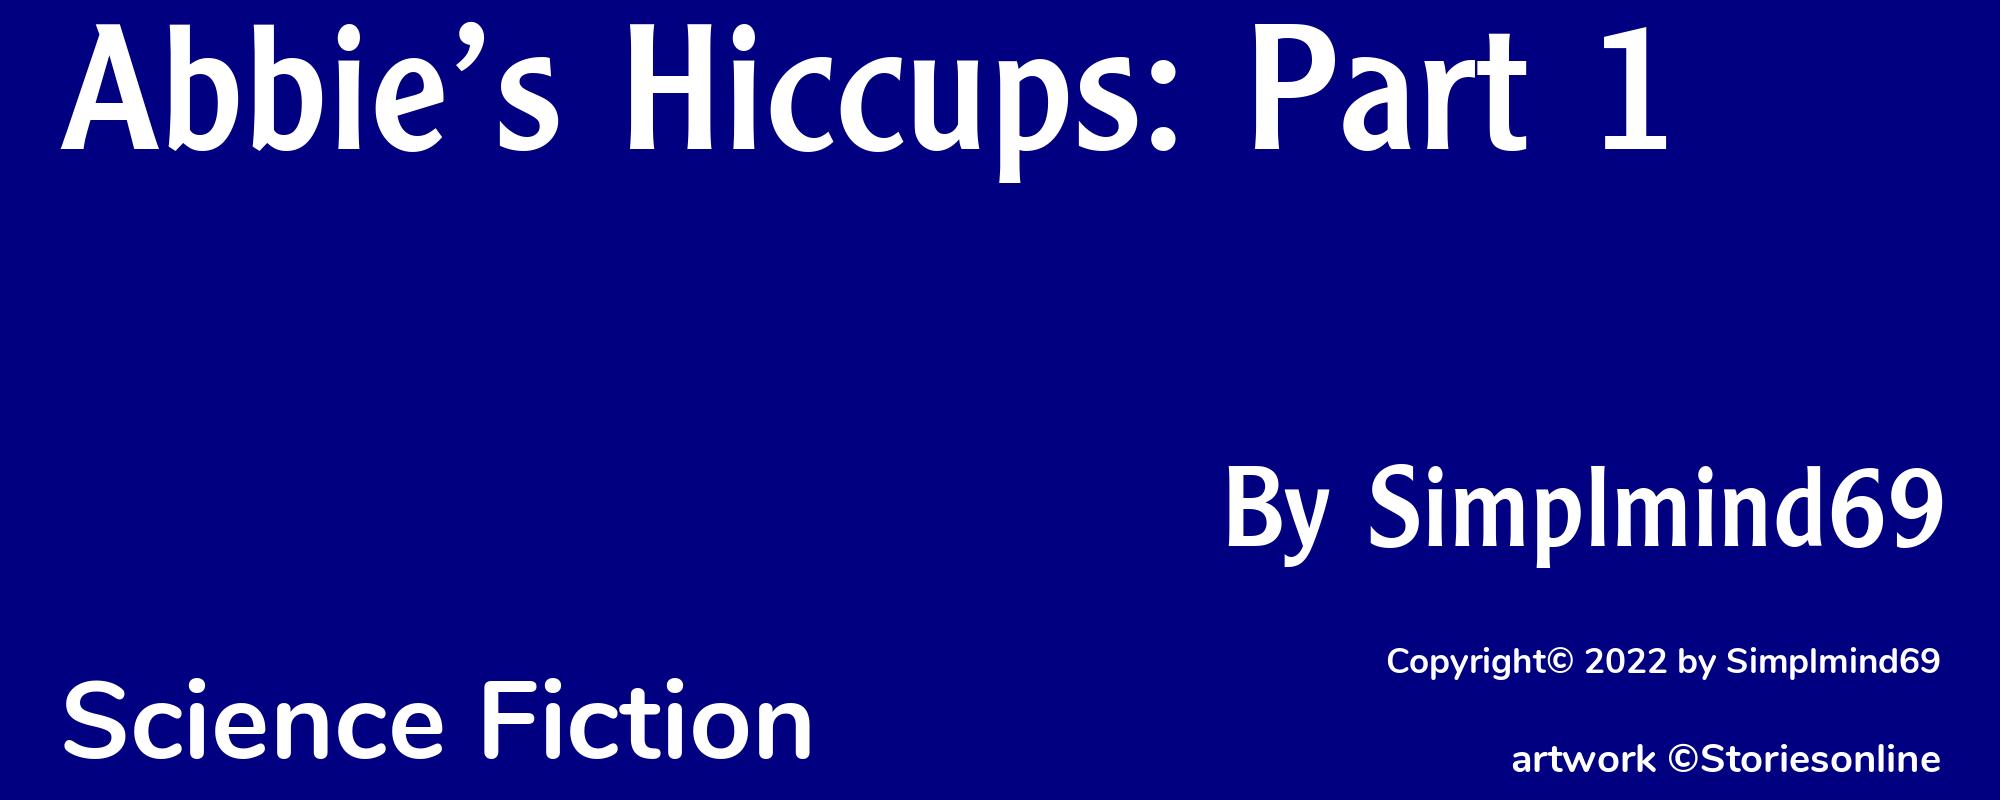 Abbie’s Hiccups: Part 1 - Cover